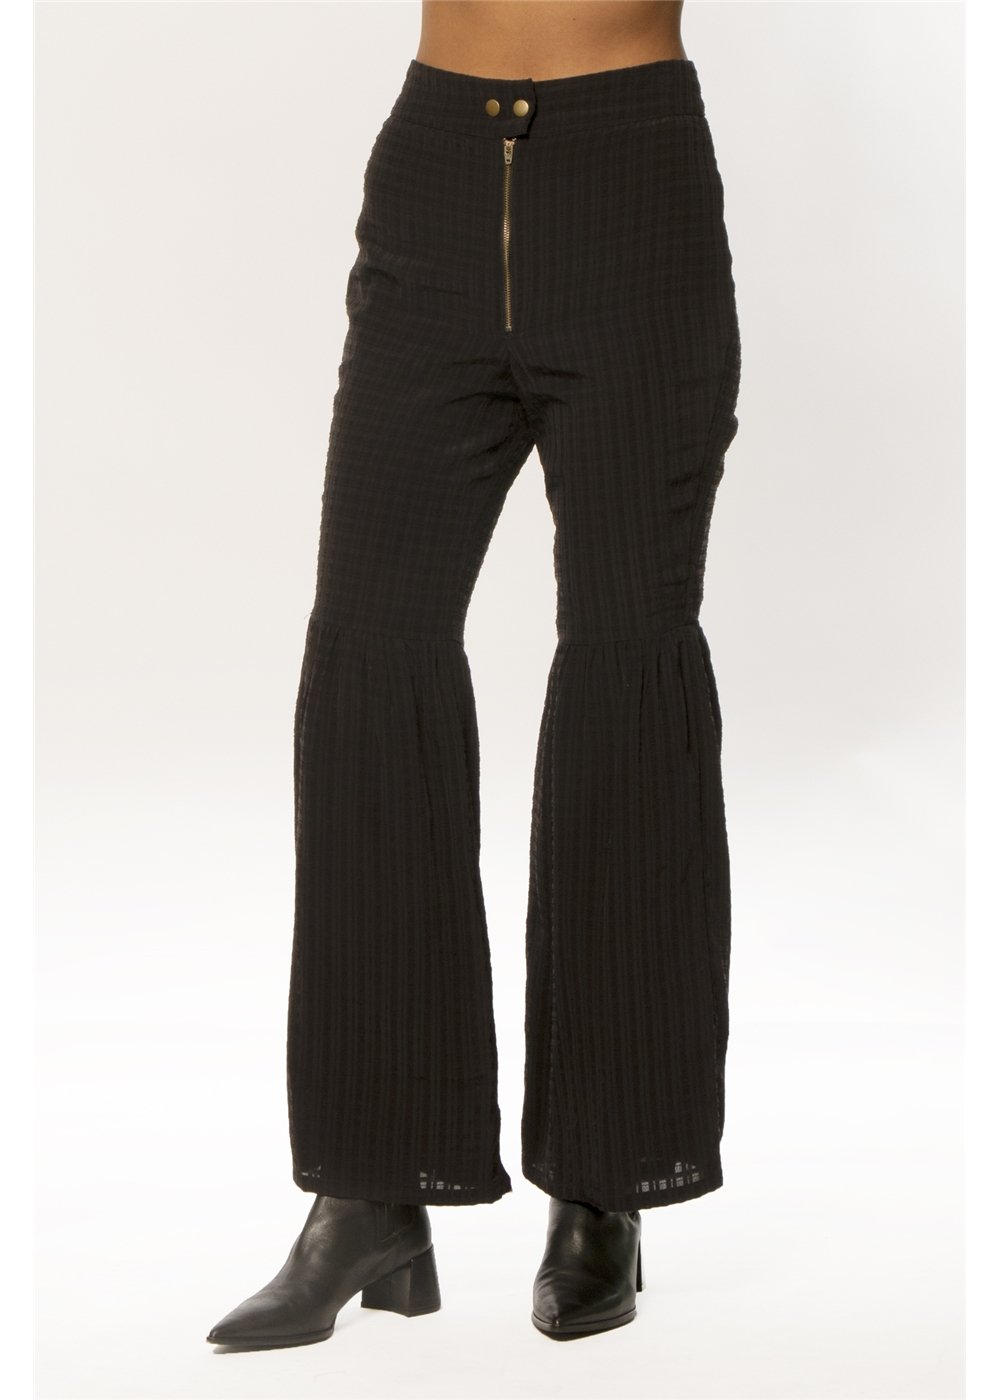 Society Amuse Women's Black Cantina Woven Pant. Front View on Model.